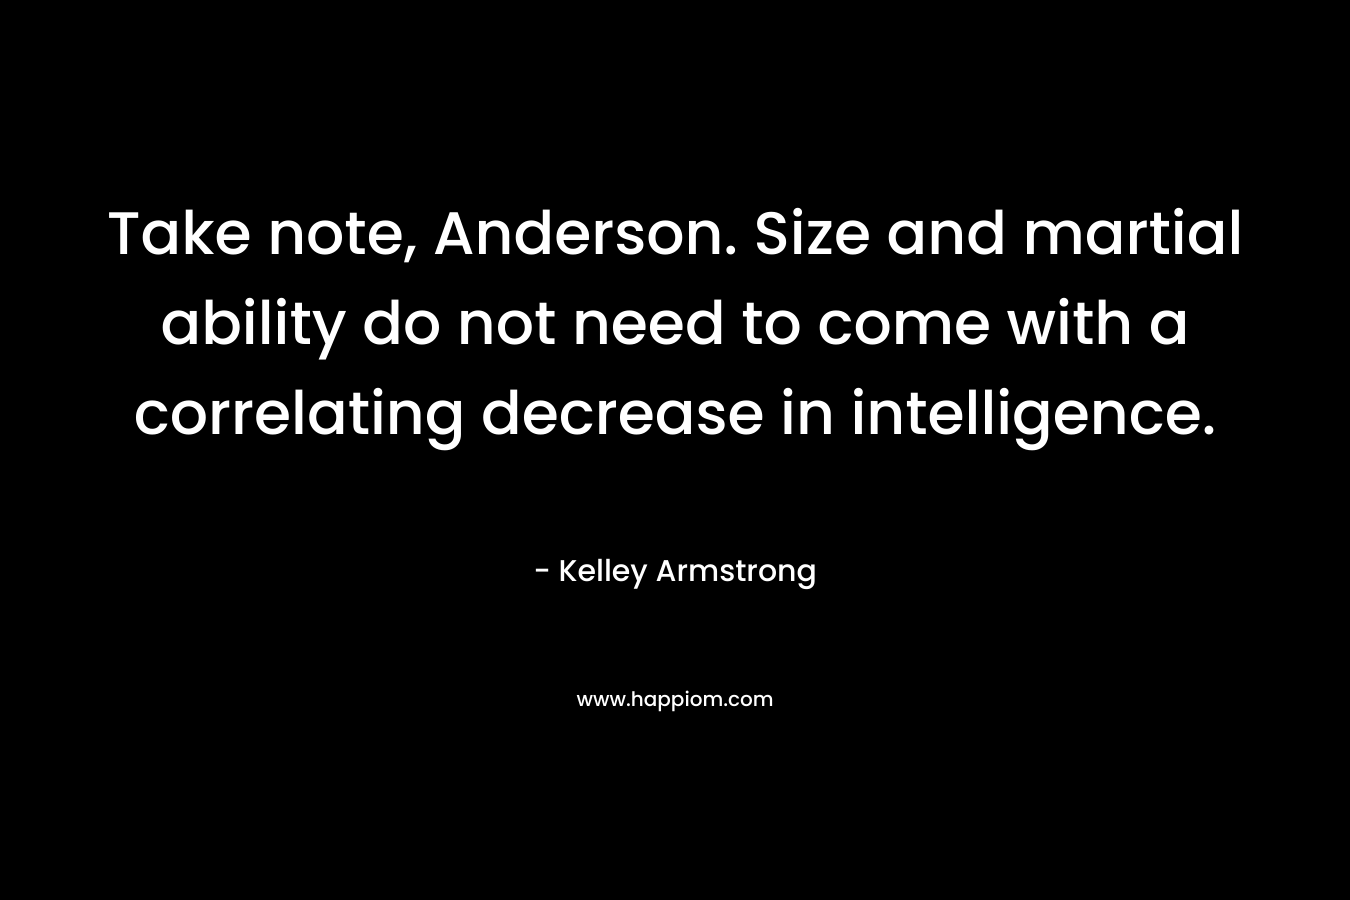 Take note, Anderson. Size and martial ability do not need to come with a correlating decrease in intelligence.